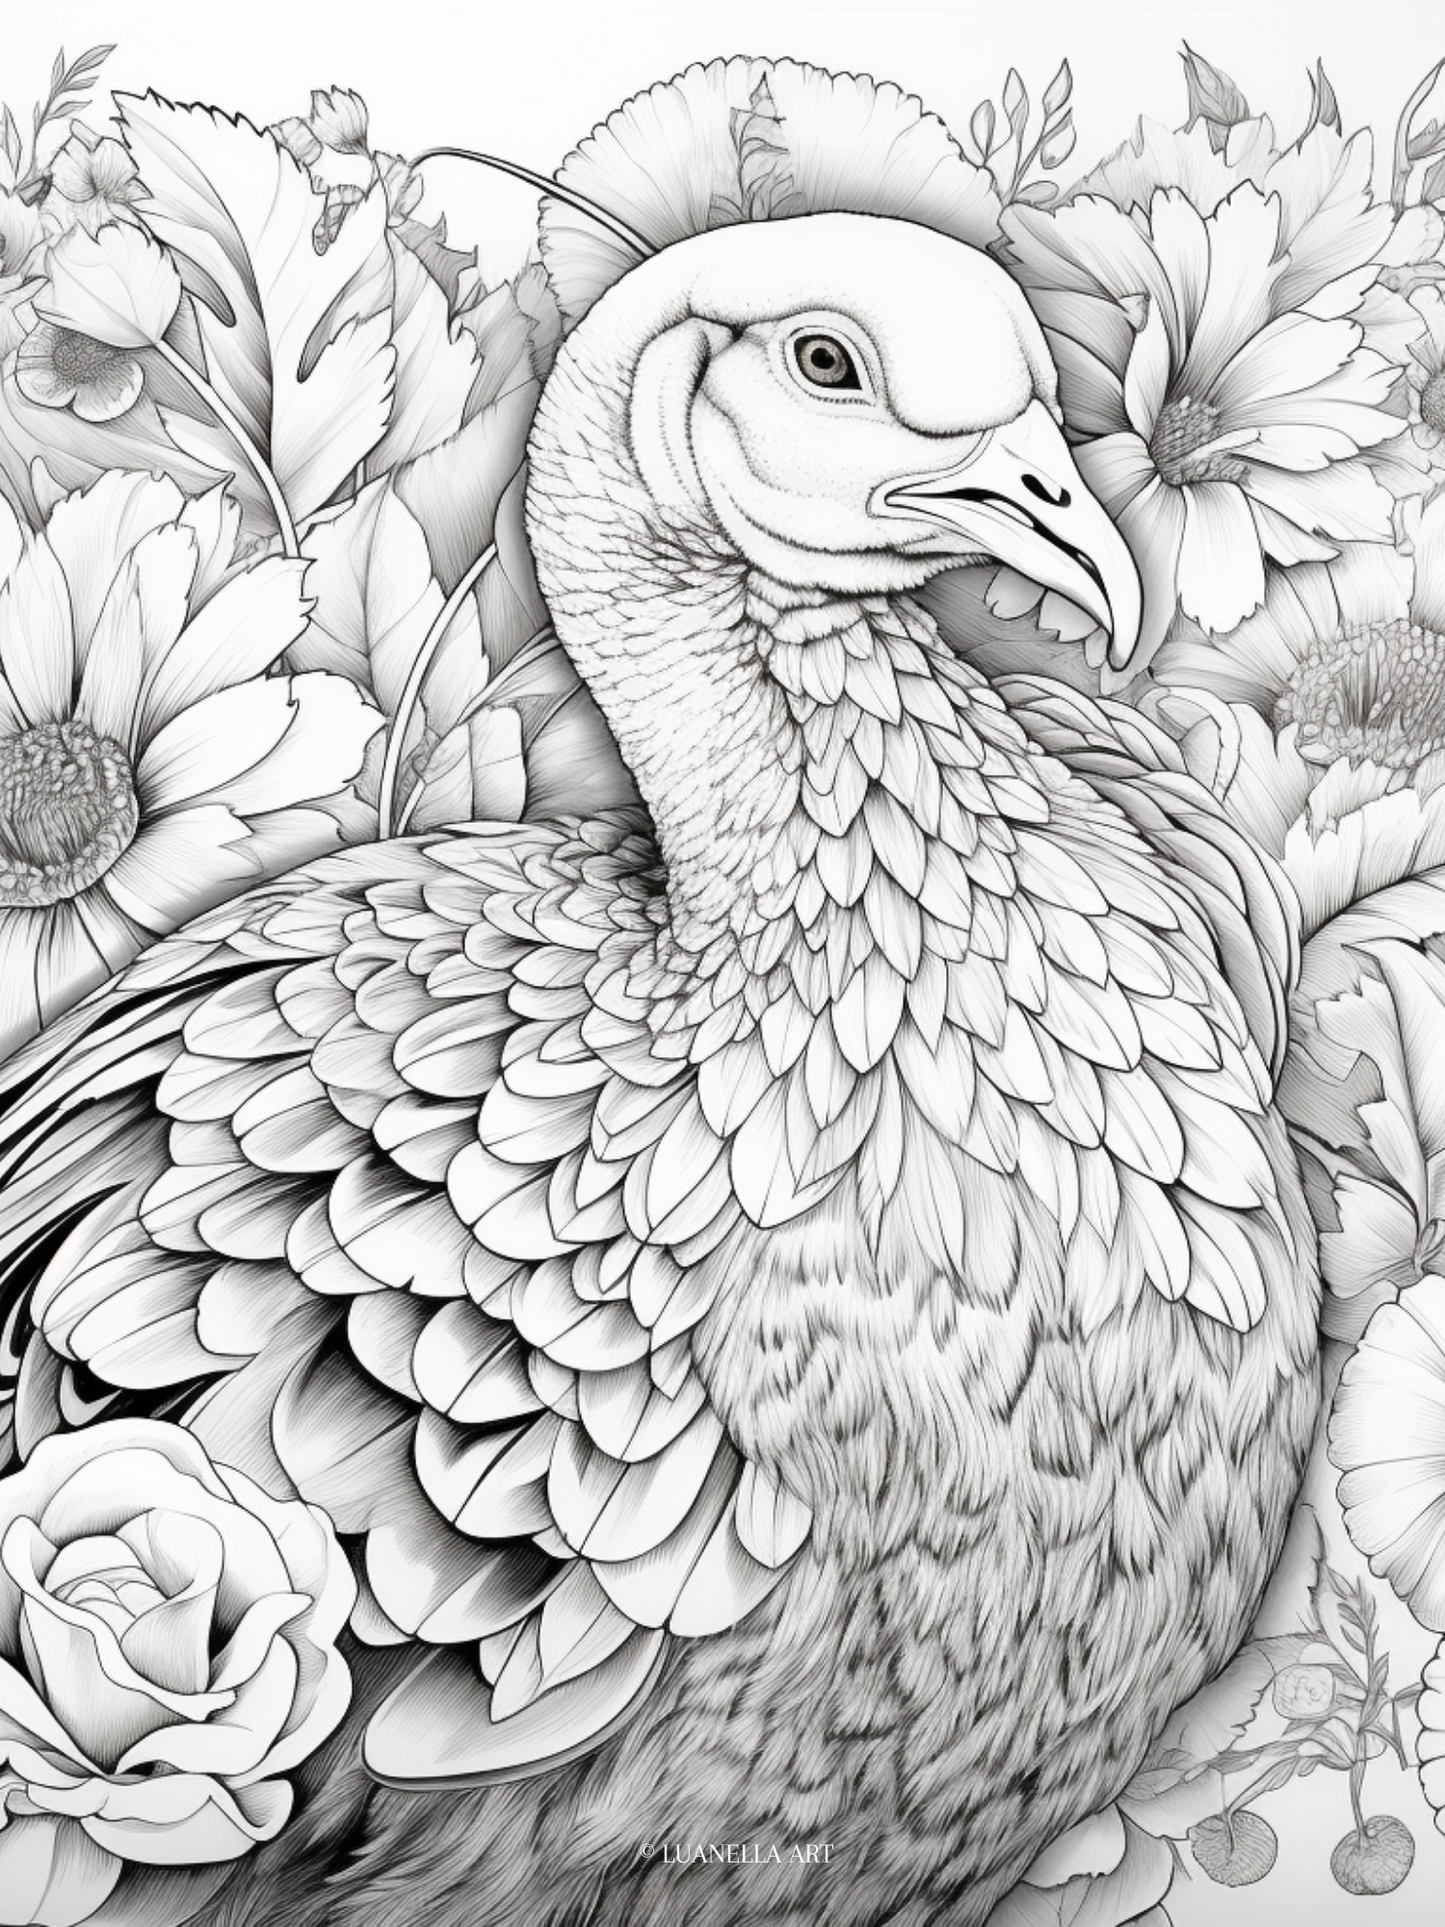 Turkey with flowers in background | Coloring Page | Instant Digital Download